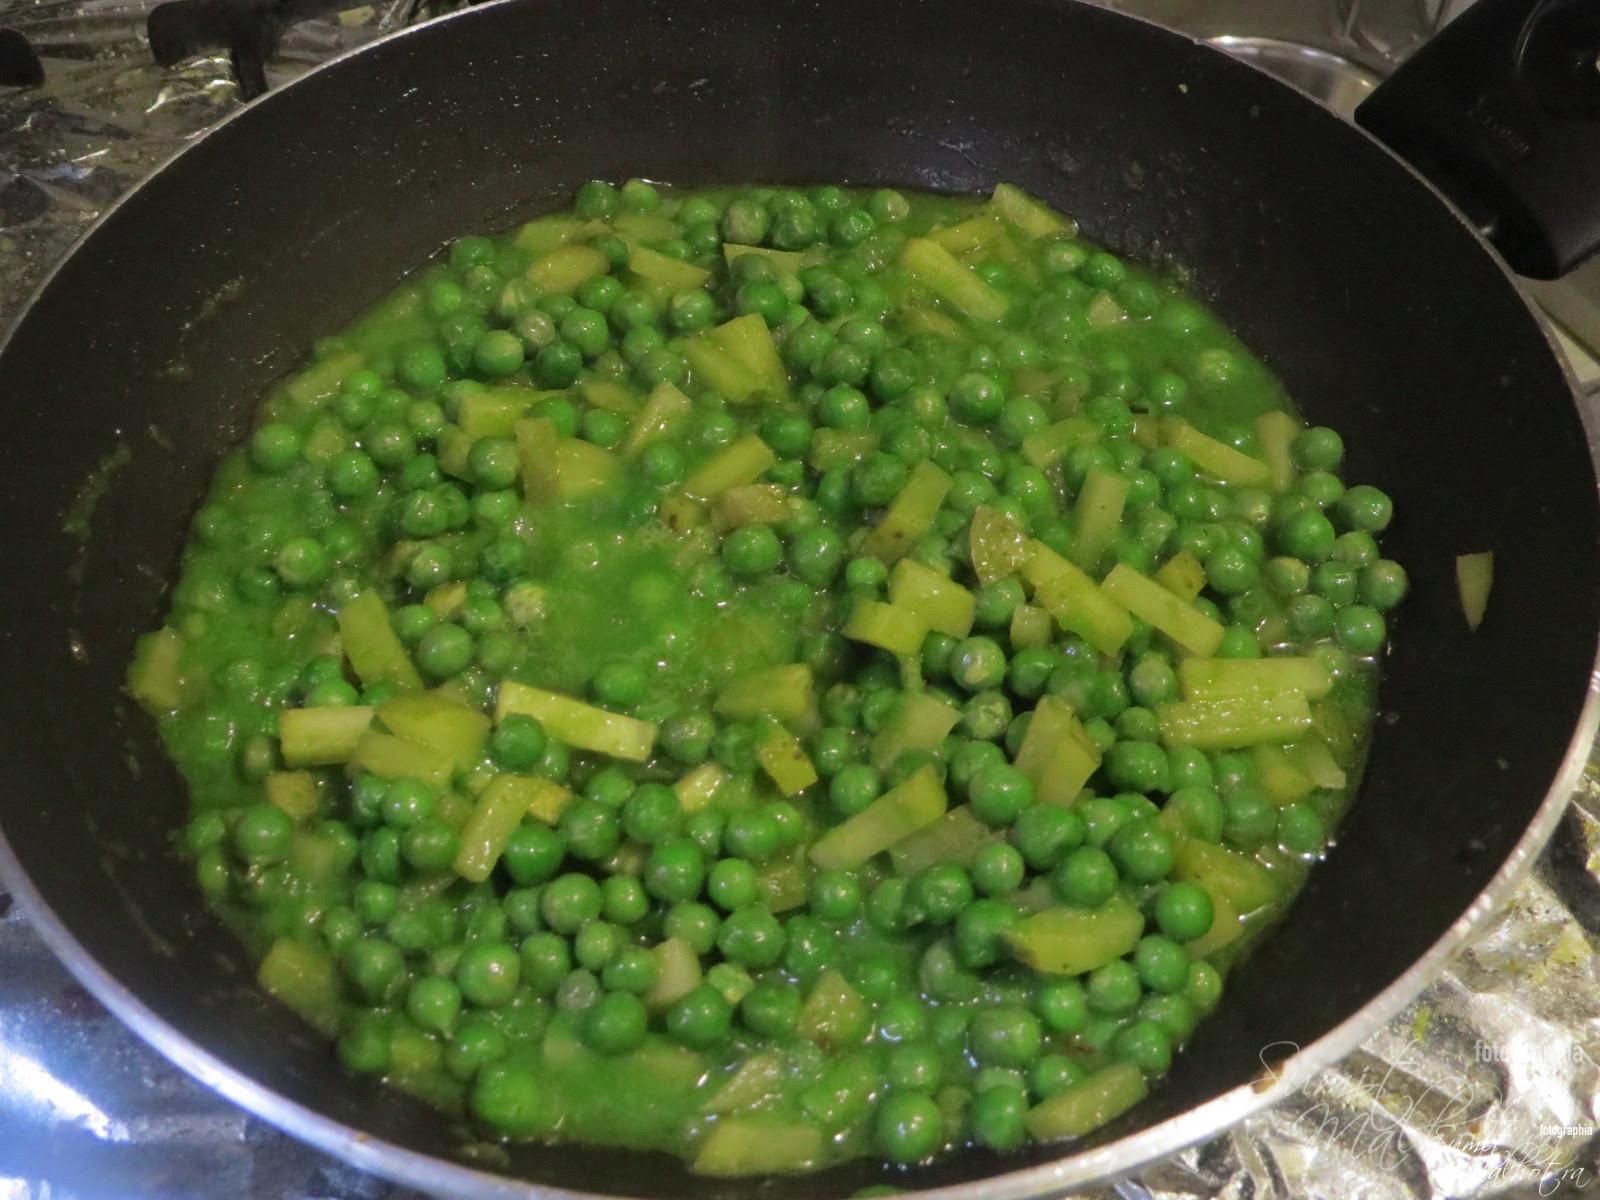 Add water, mix it and cover it to let cook further. Stir in between and cook till potato and peas are soft or mushy.